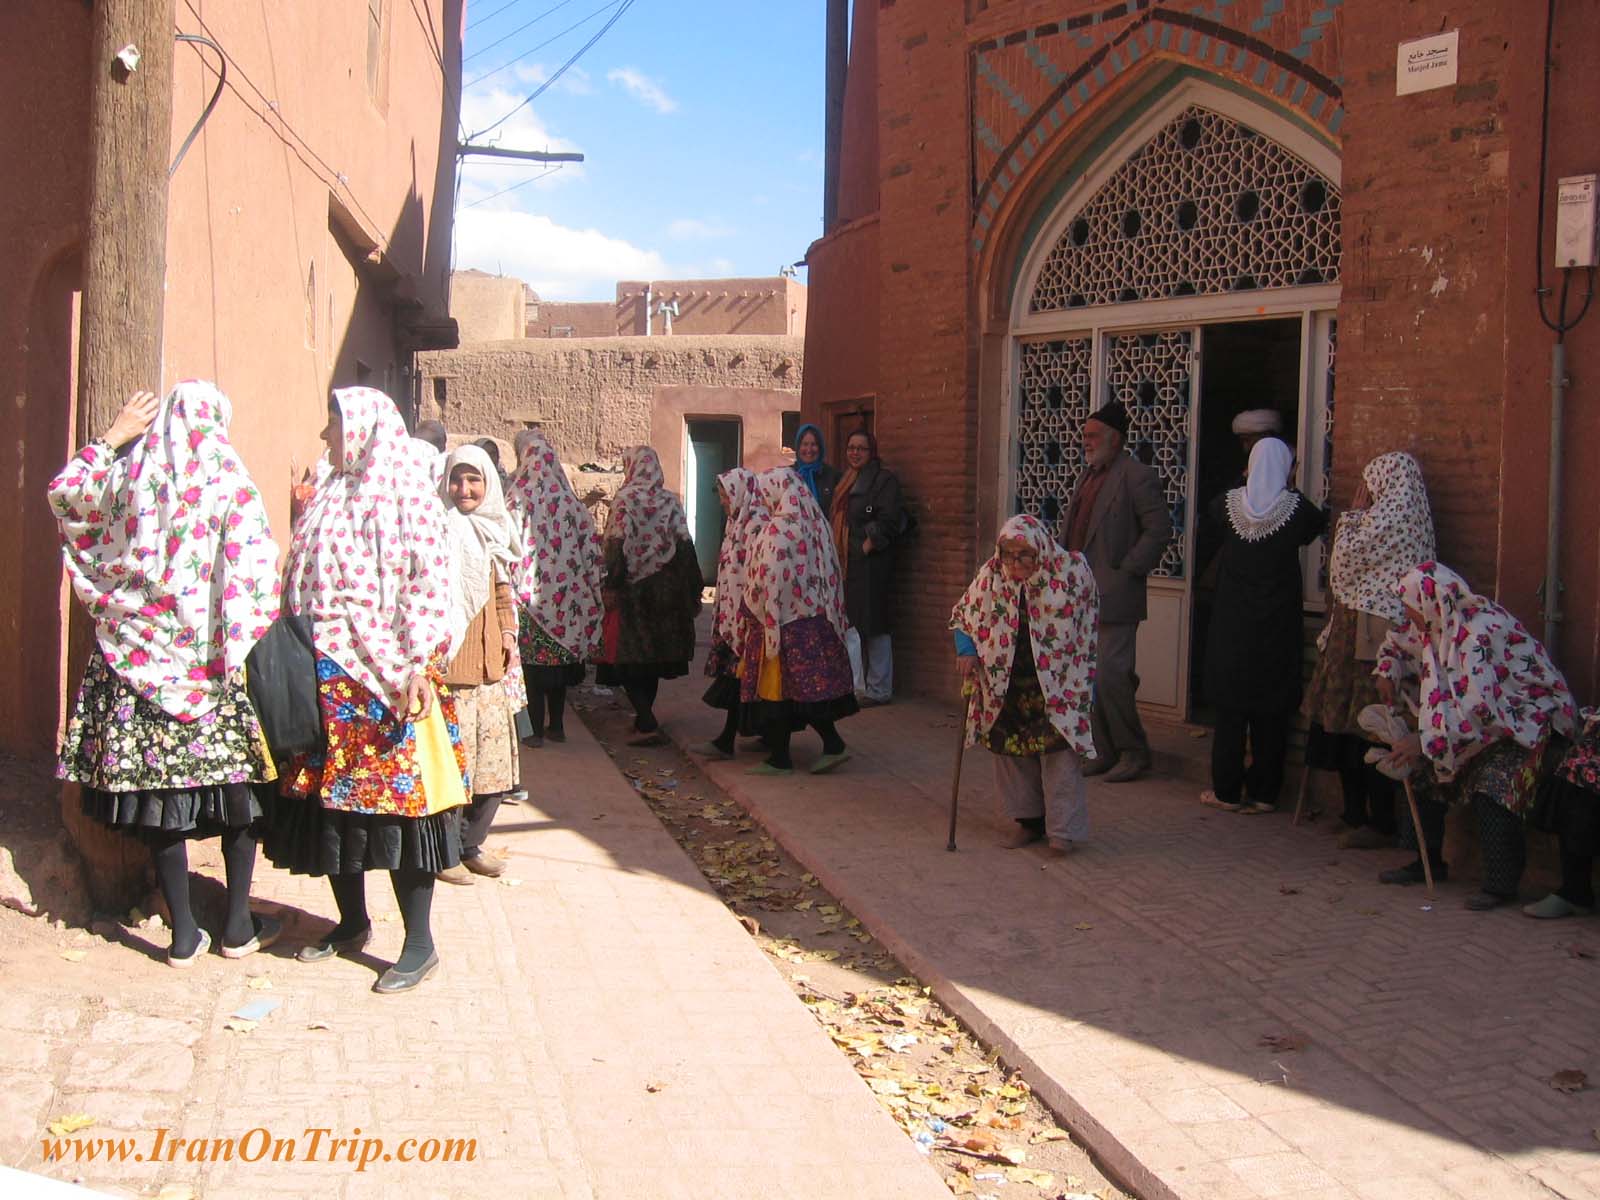 Historical Villages of Iran - Abyaneh old Village